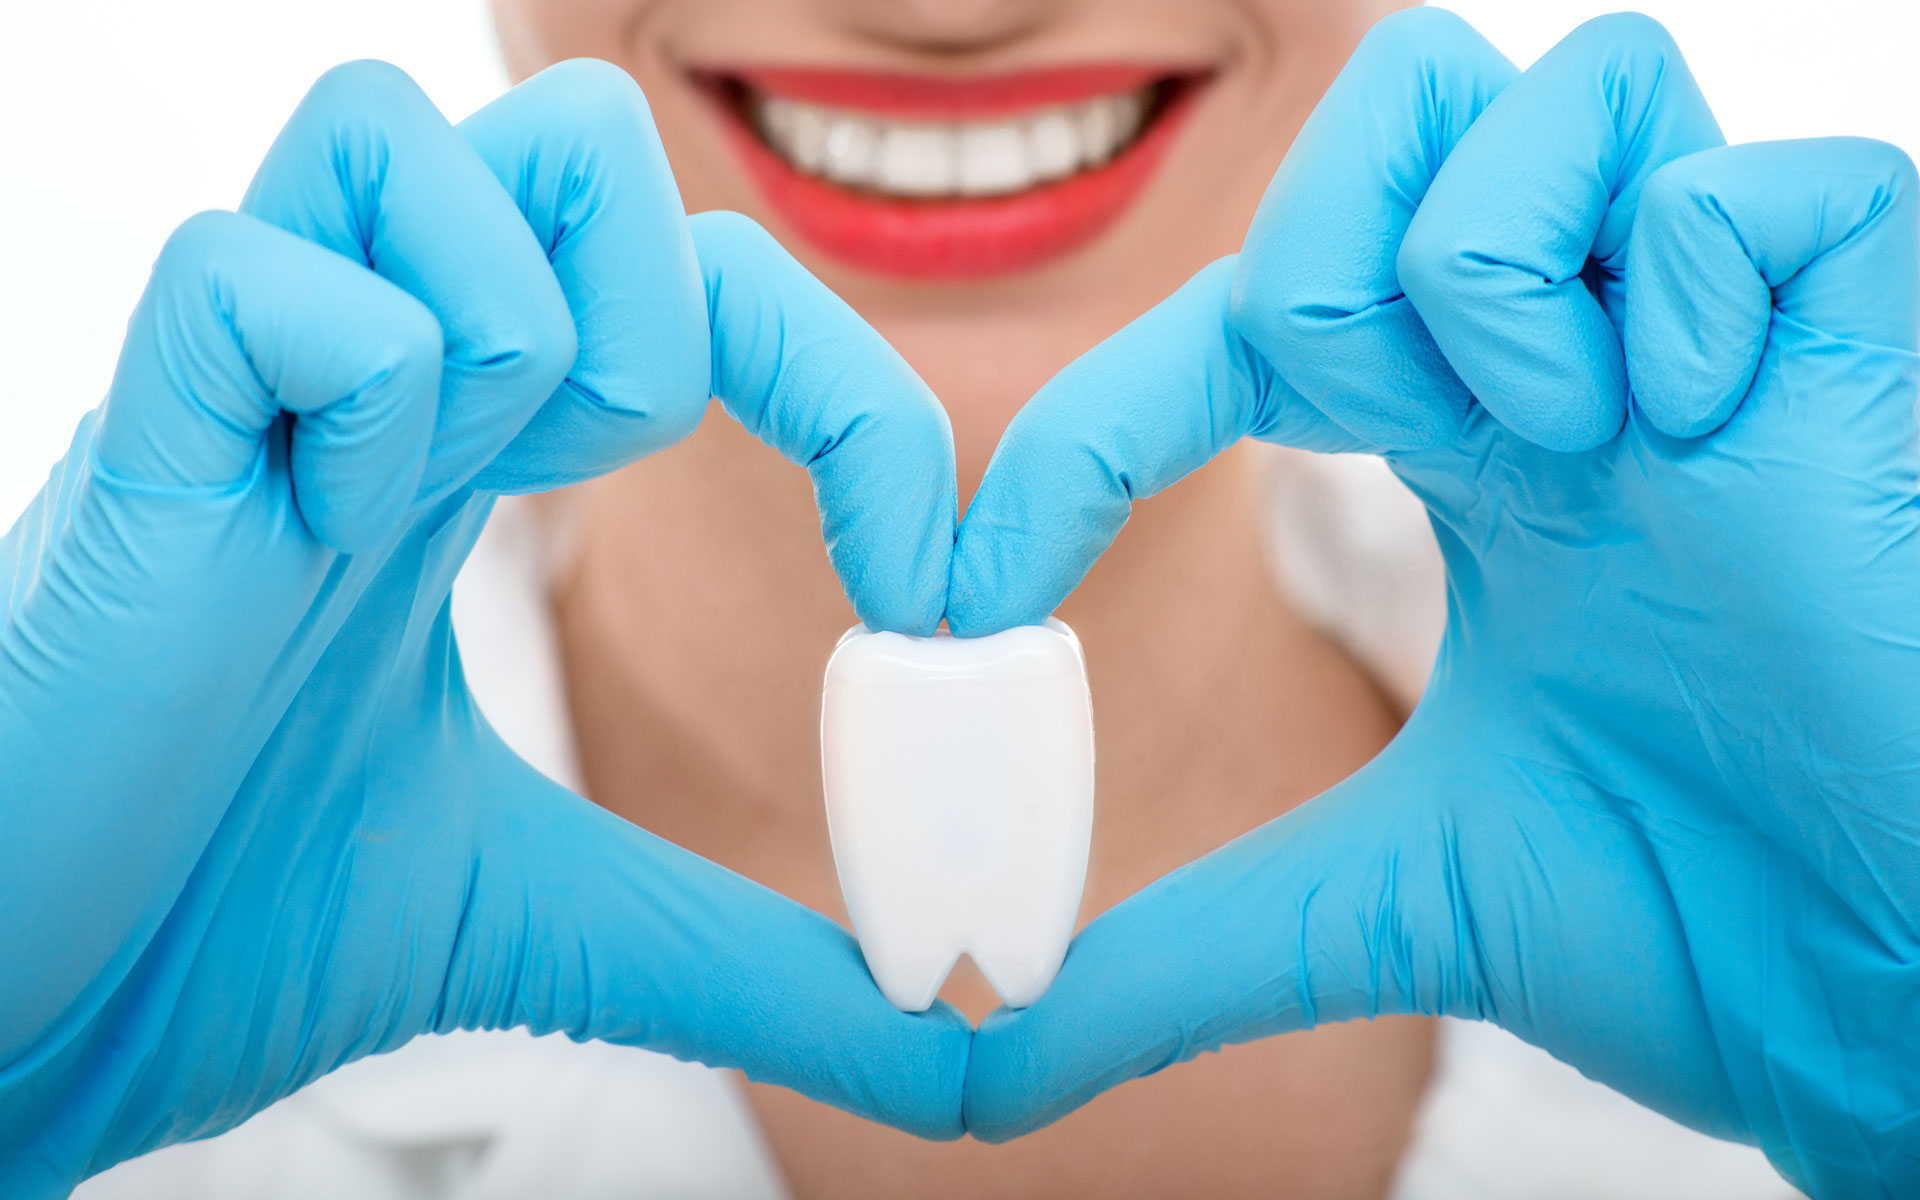 Specialty Dental Care Downey - Your Downey Dentist